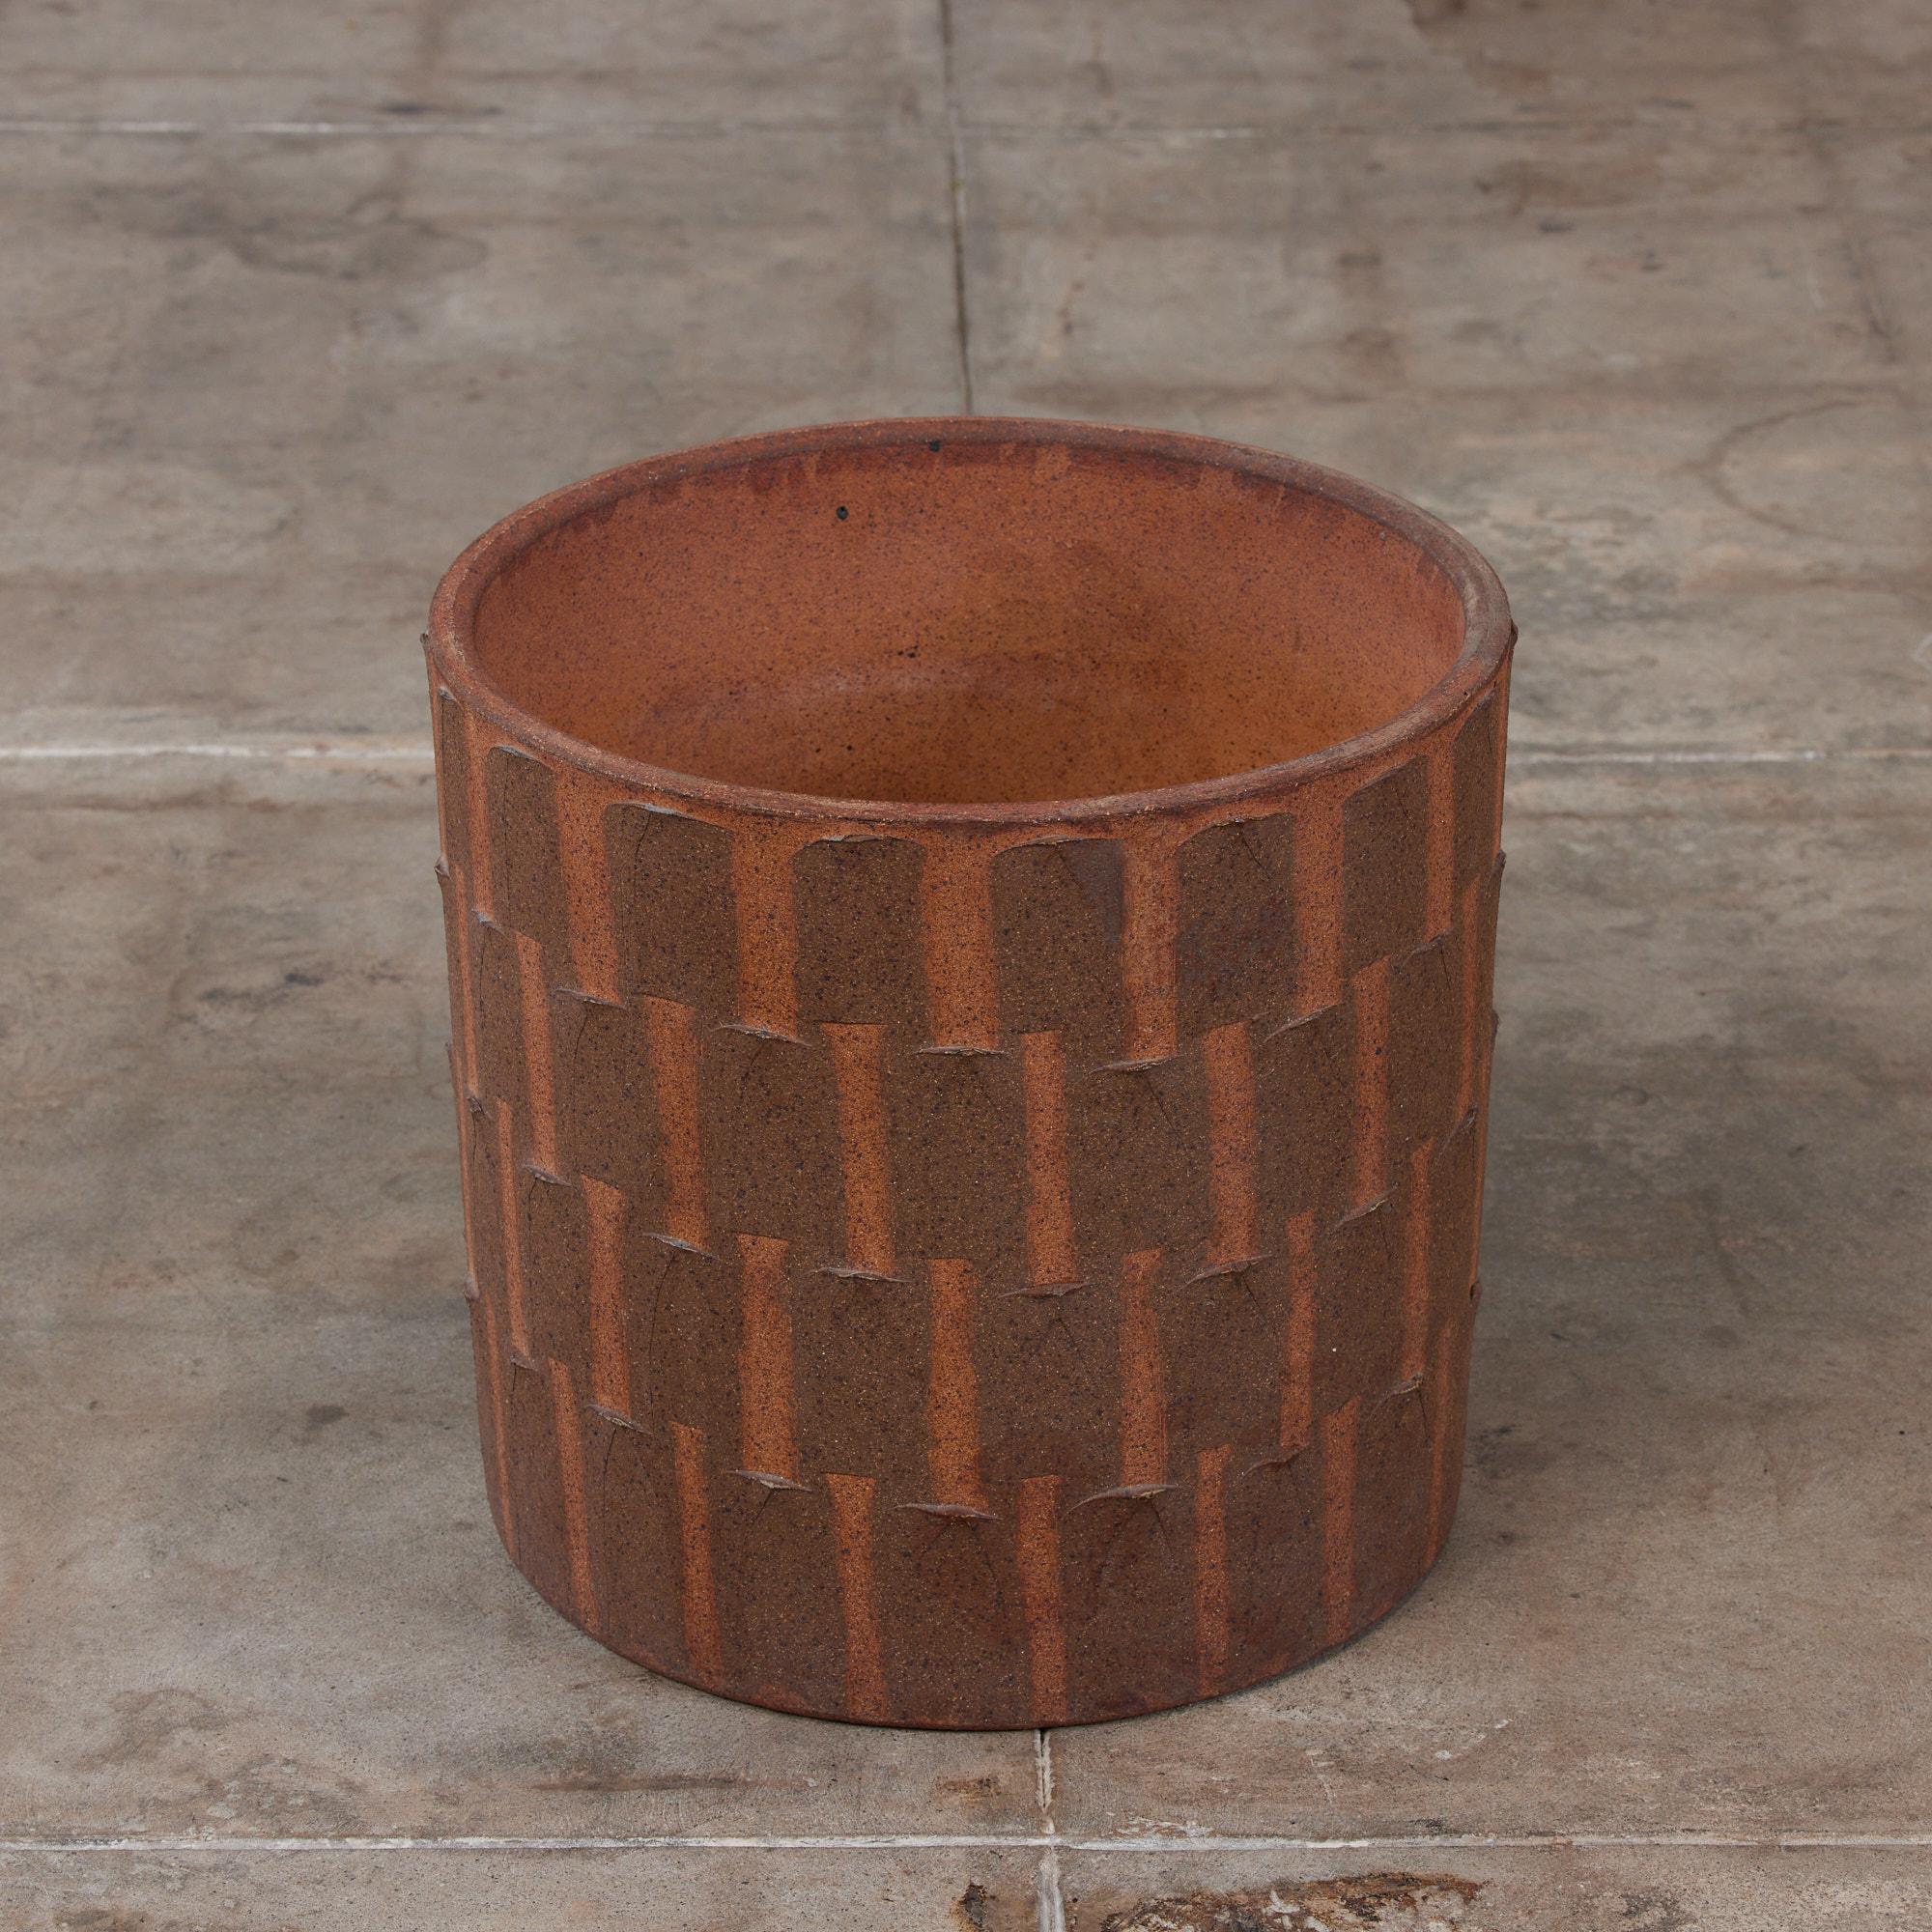 American David Cressey Ribbed Stoneware Pro/Artisan Planter for Architectural Pottery